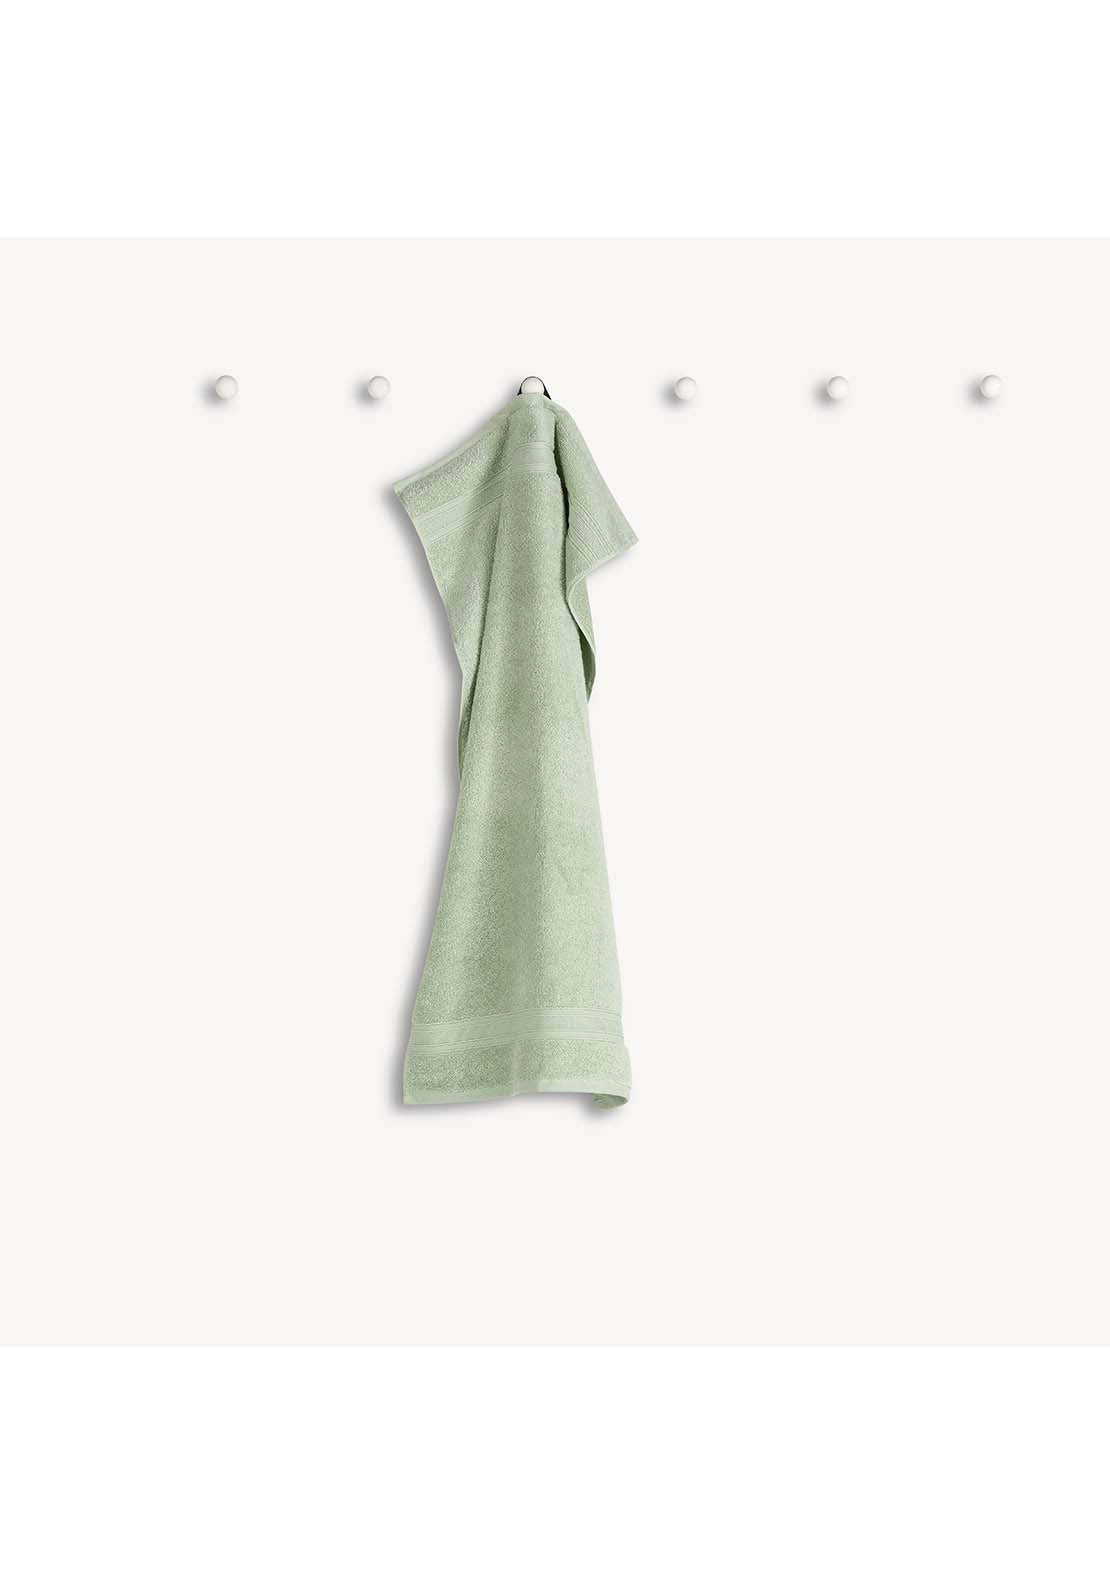 Christy Serene Hand Towel - Cucumber 2 Shaws Department Stores